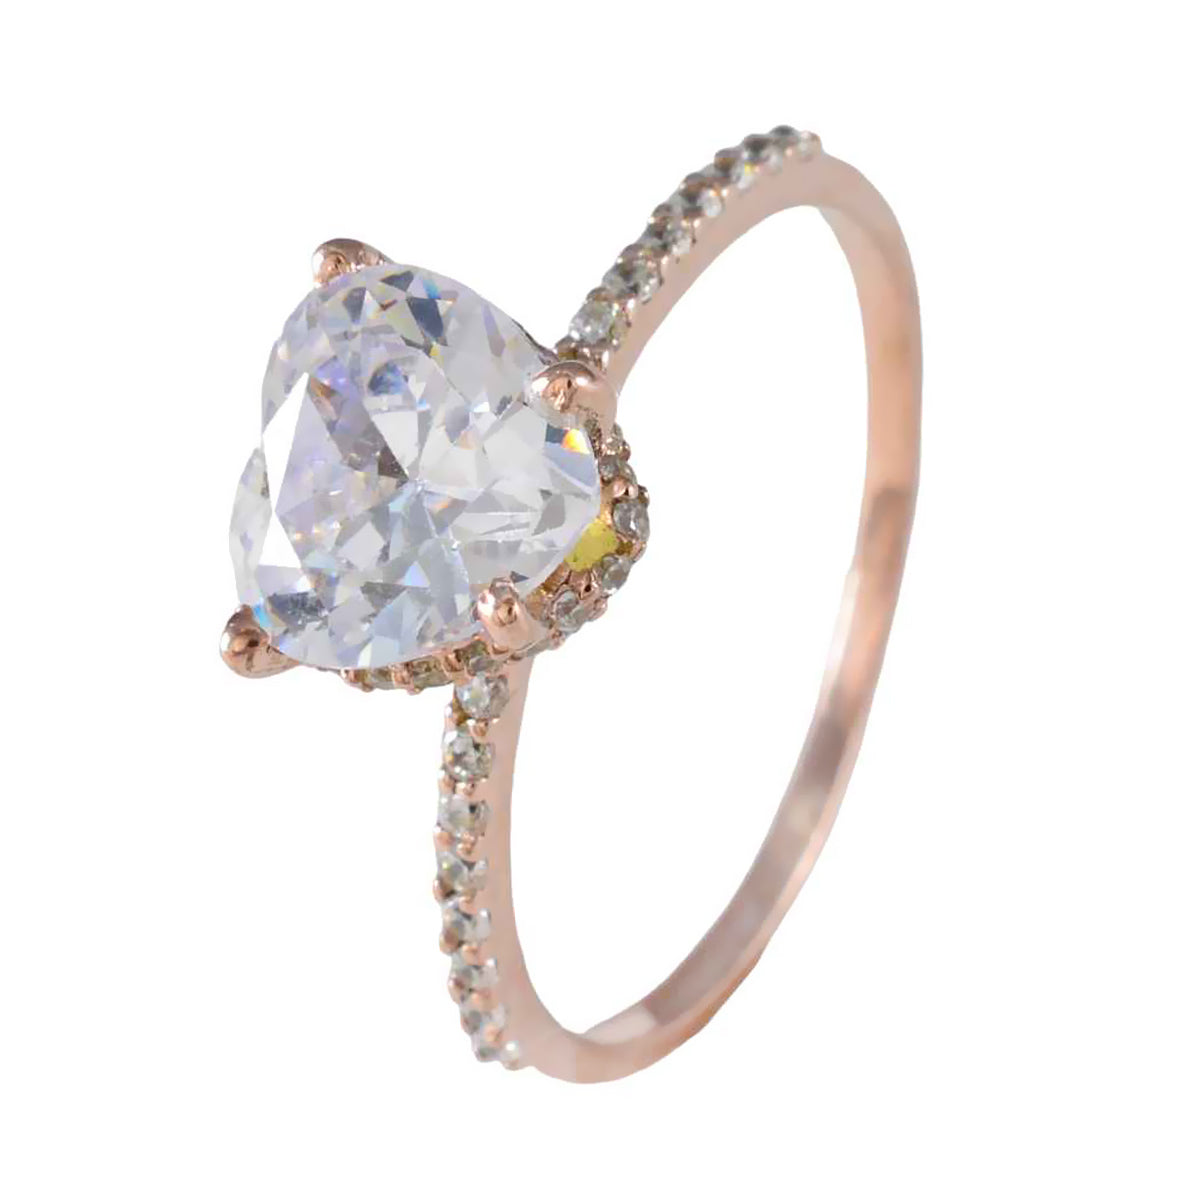 Riyo Suppiler Silver Ring With Rose Gold Plating White CZ Stone Heart Shape Prong Setting Stylish Jewelry Easter Ring